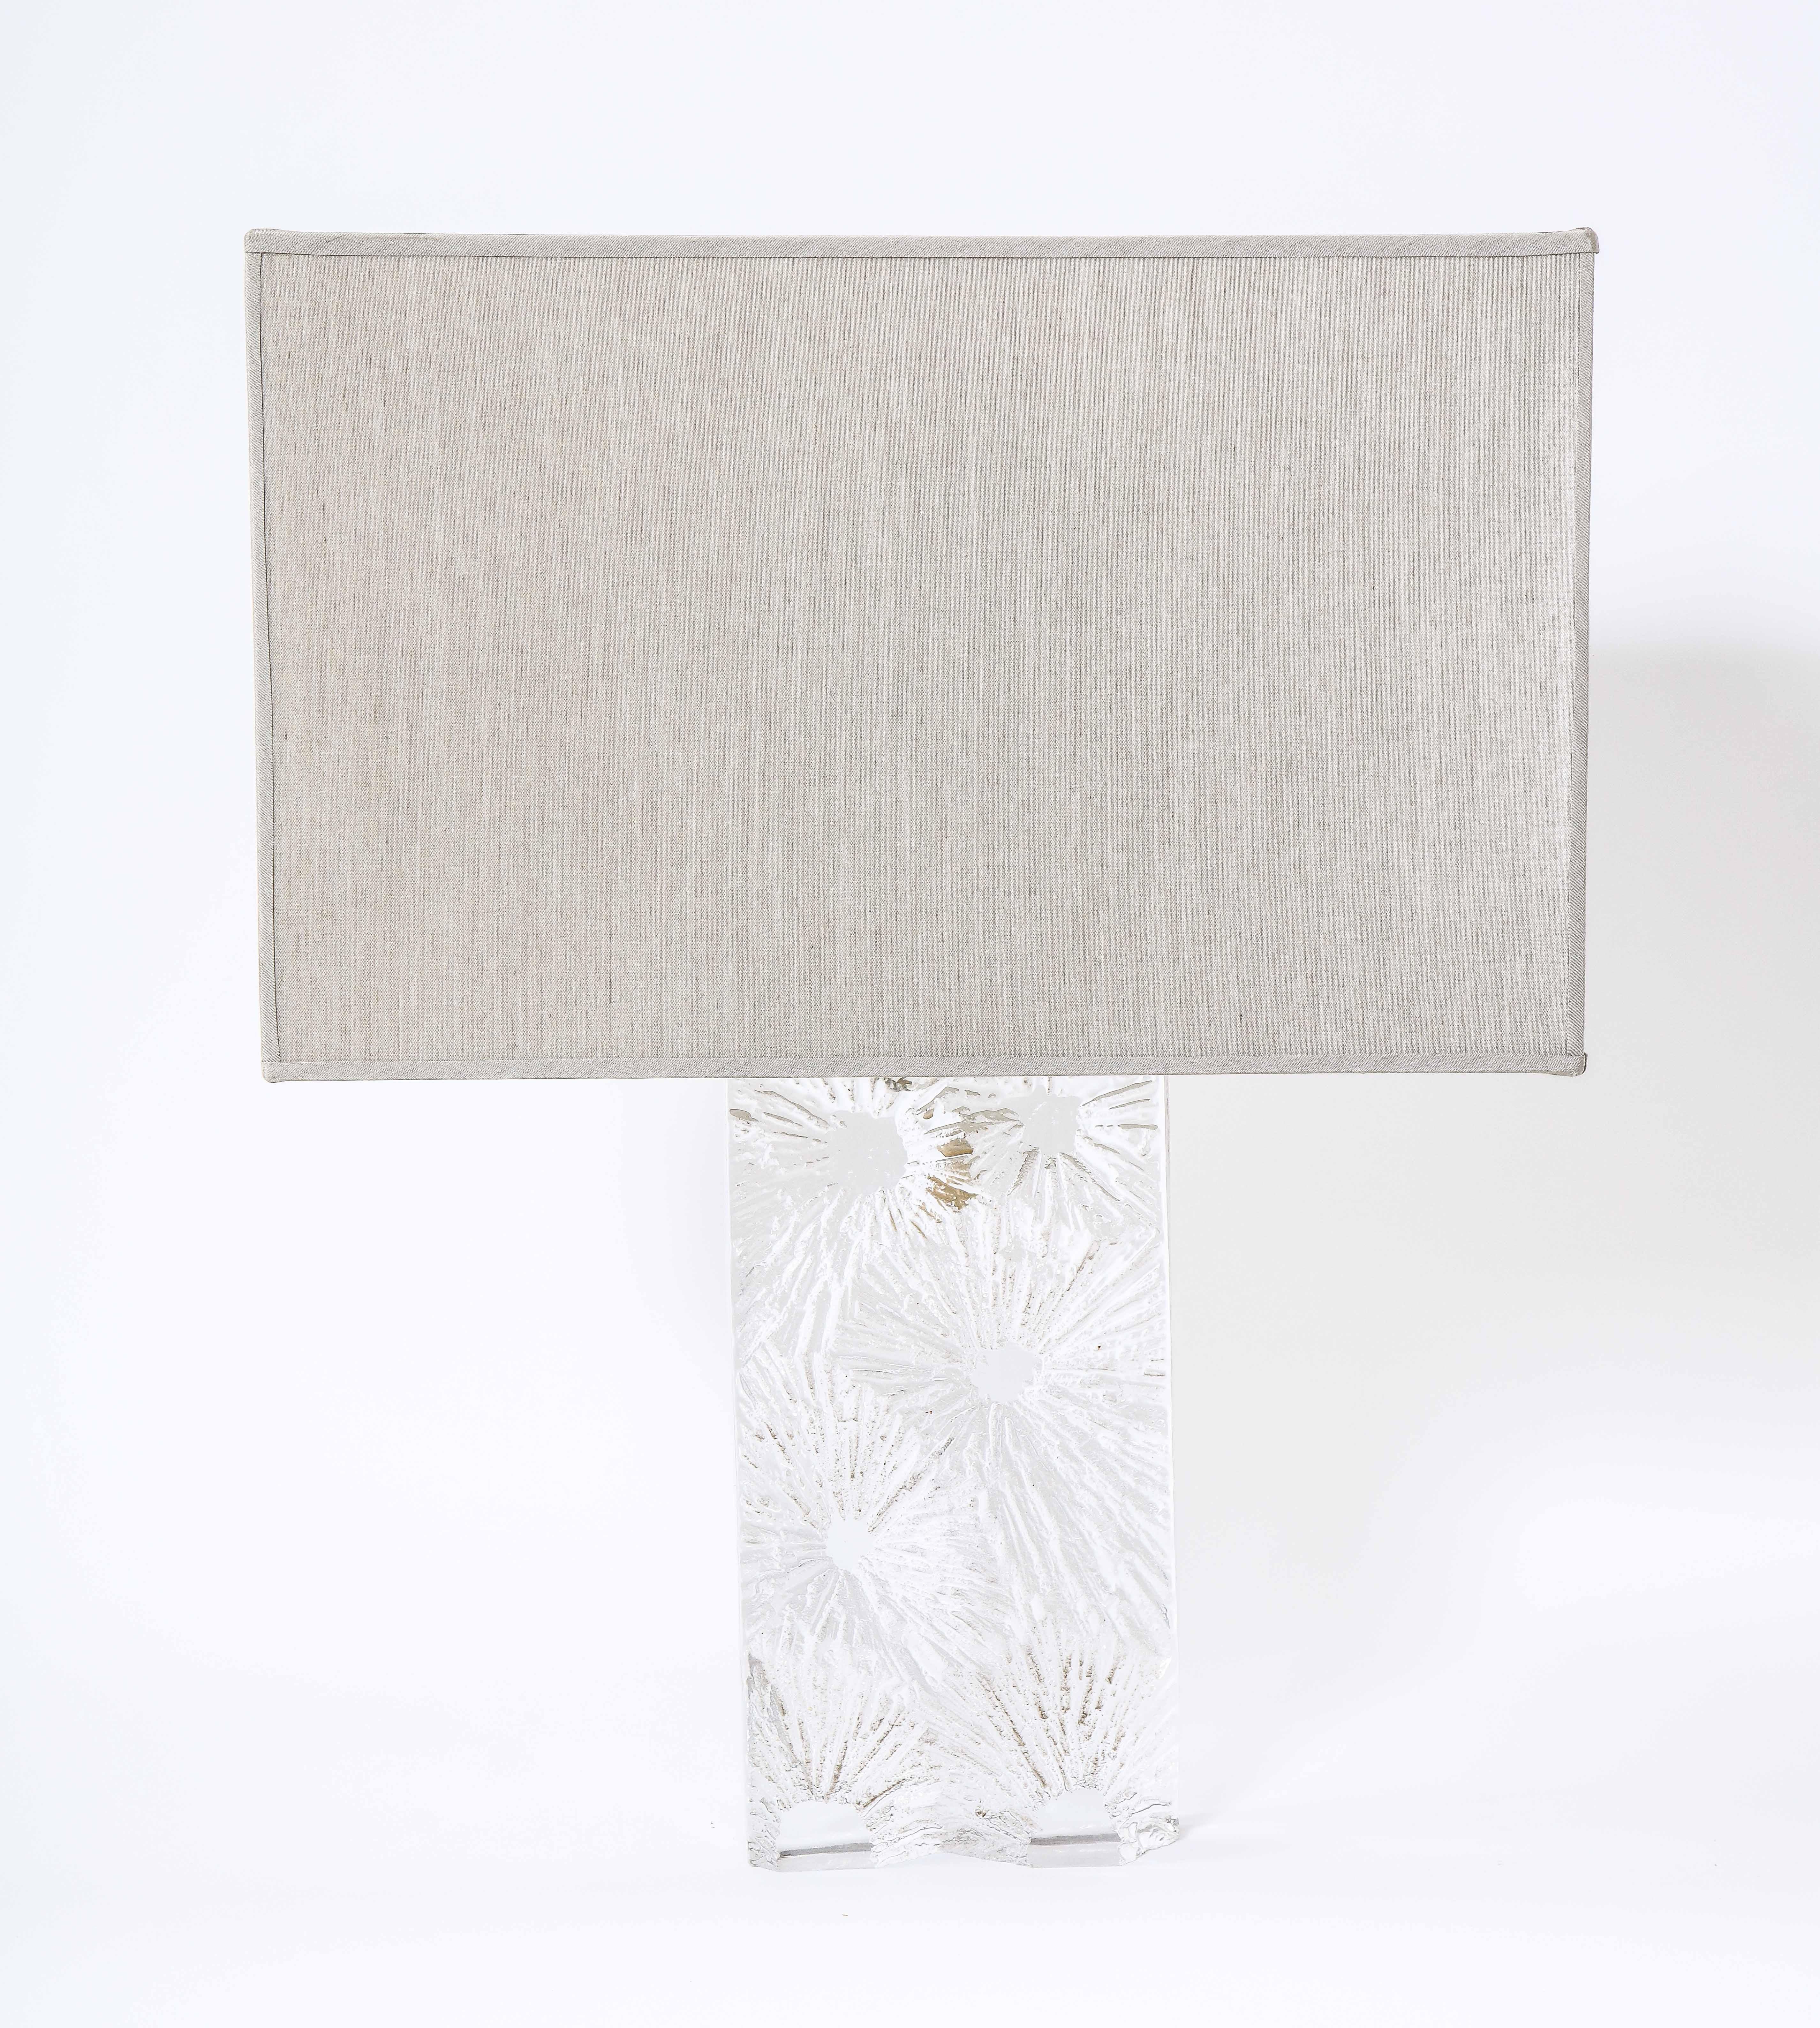 Crystal table lamp by Daum with acid engraved Chardon motif, signed on the bottom.

Rewire and shade upon request.